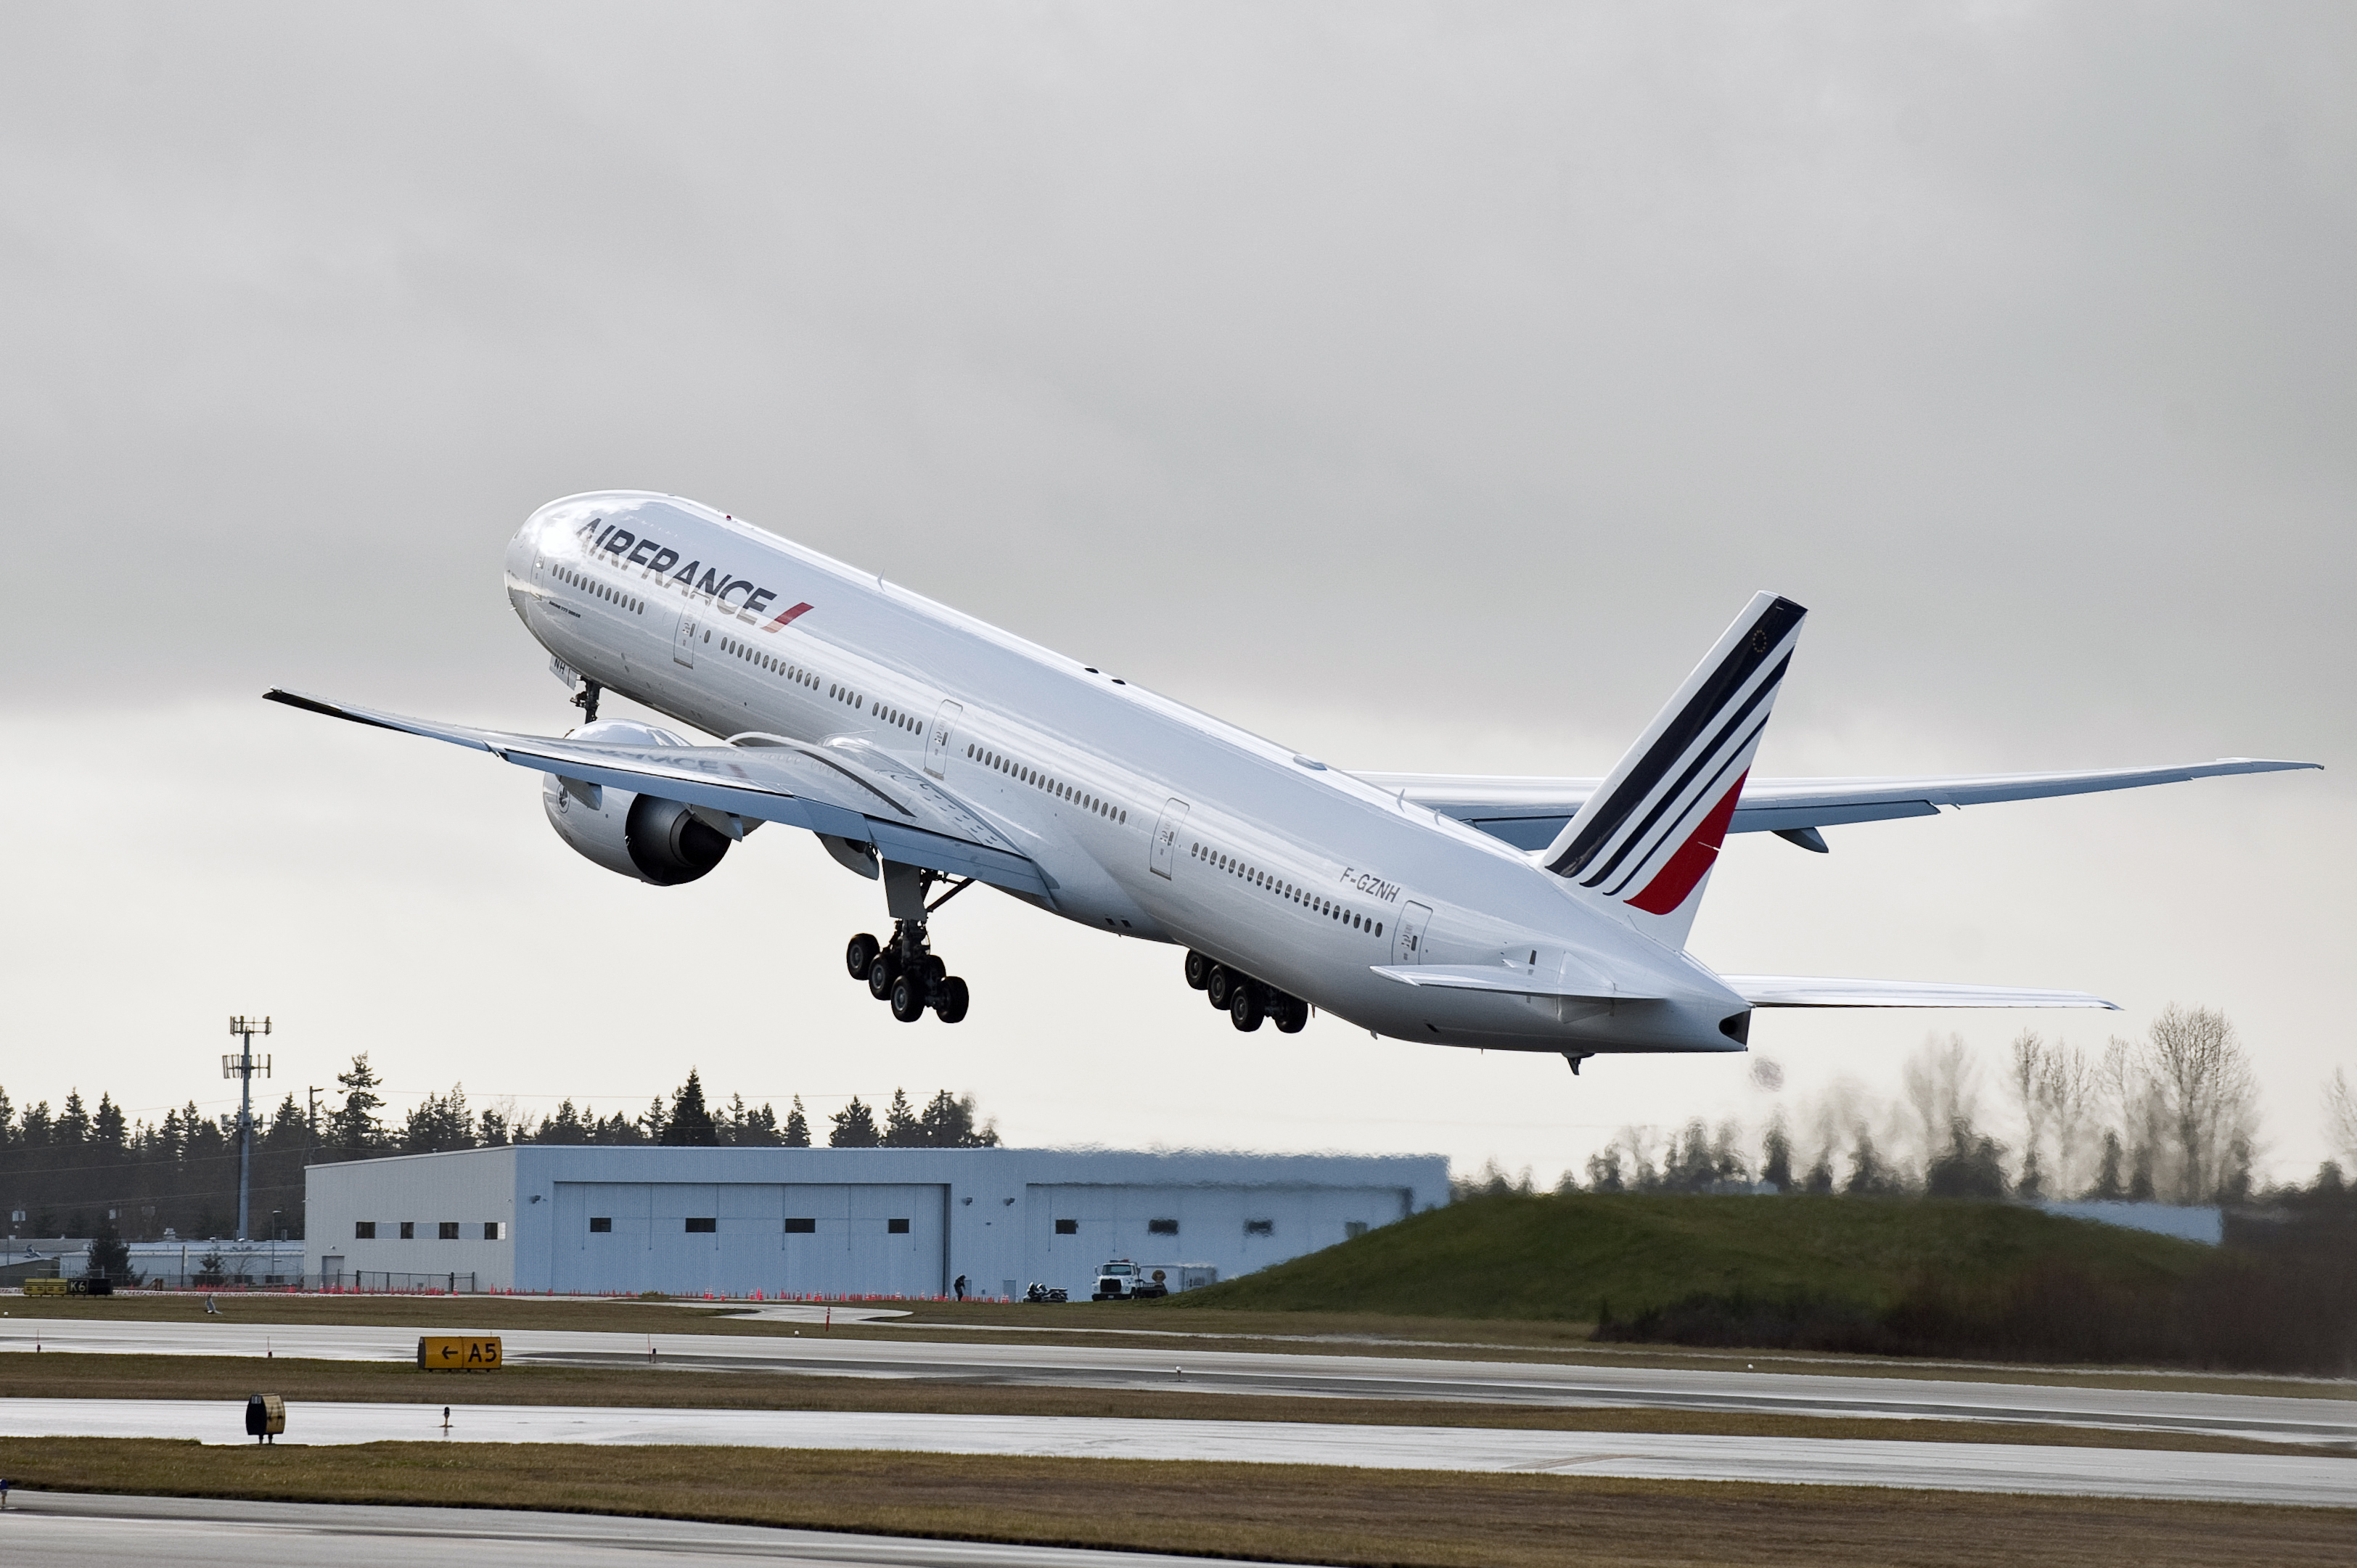 plane, boeing, miscellanea, miscellaneous, airplane, airliner, airfrance